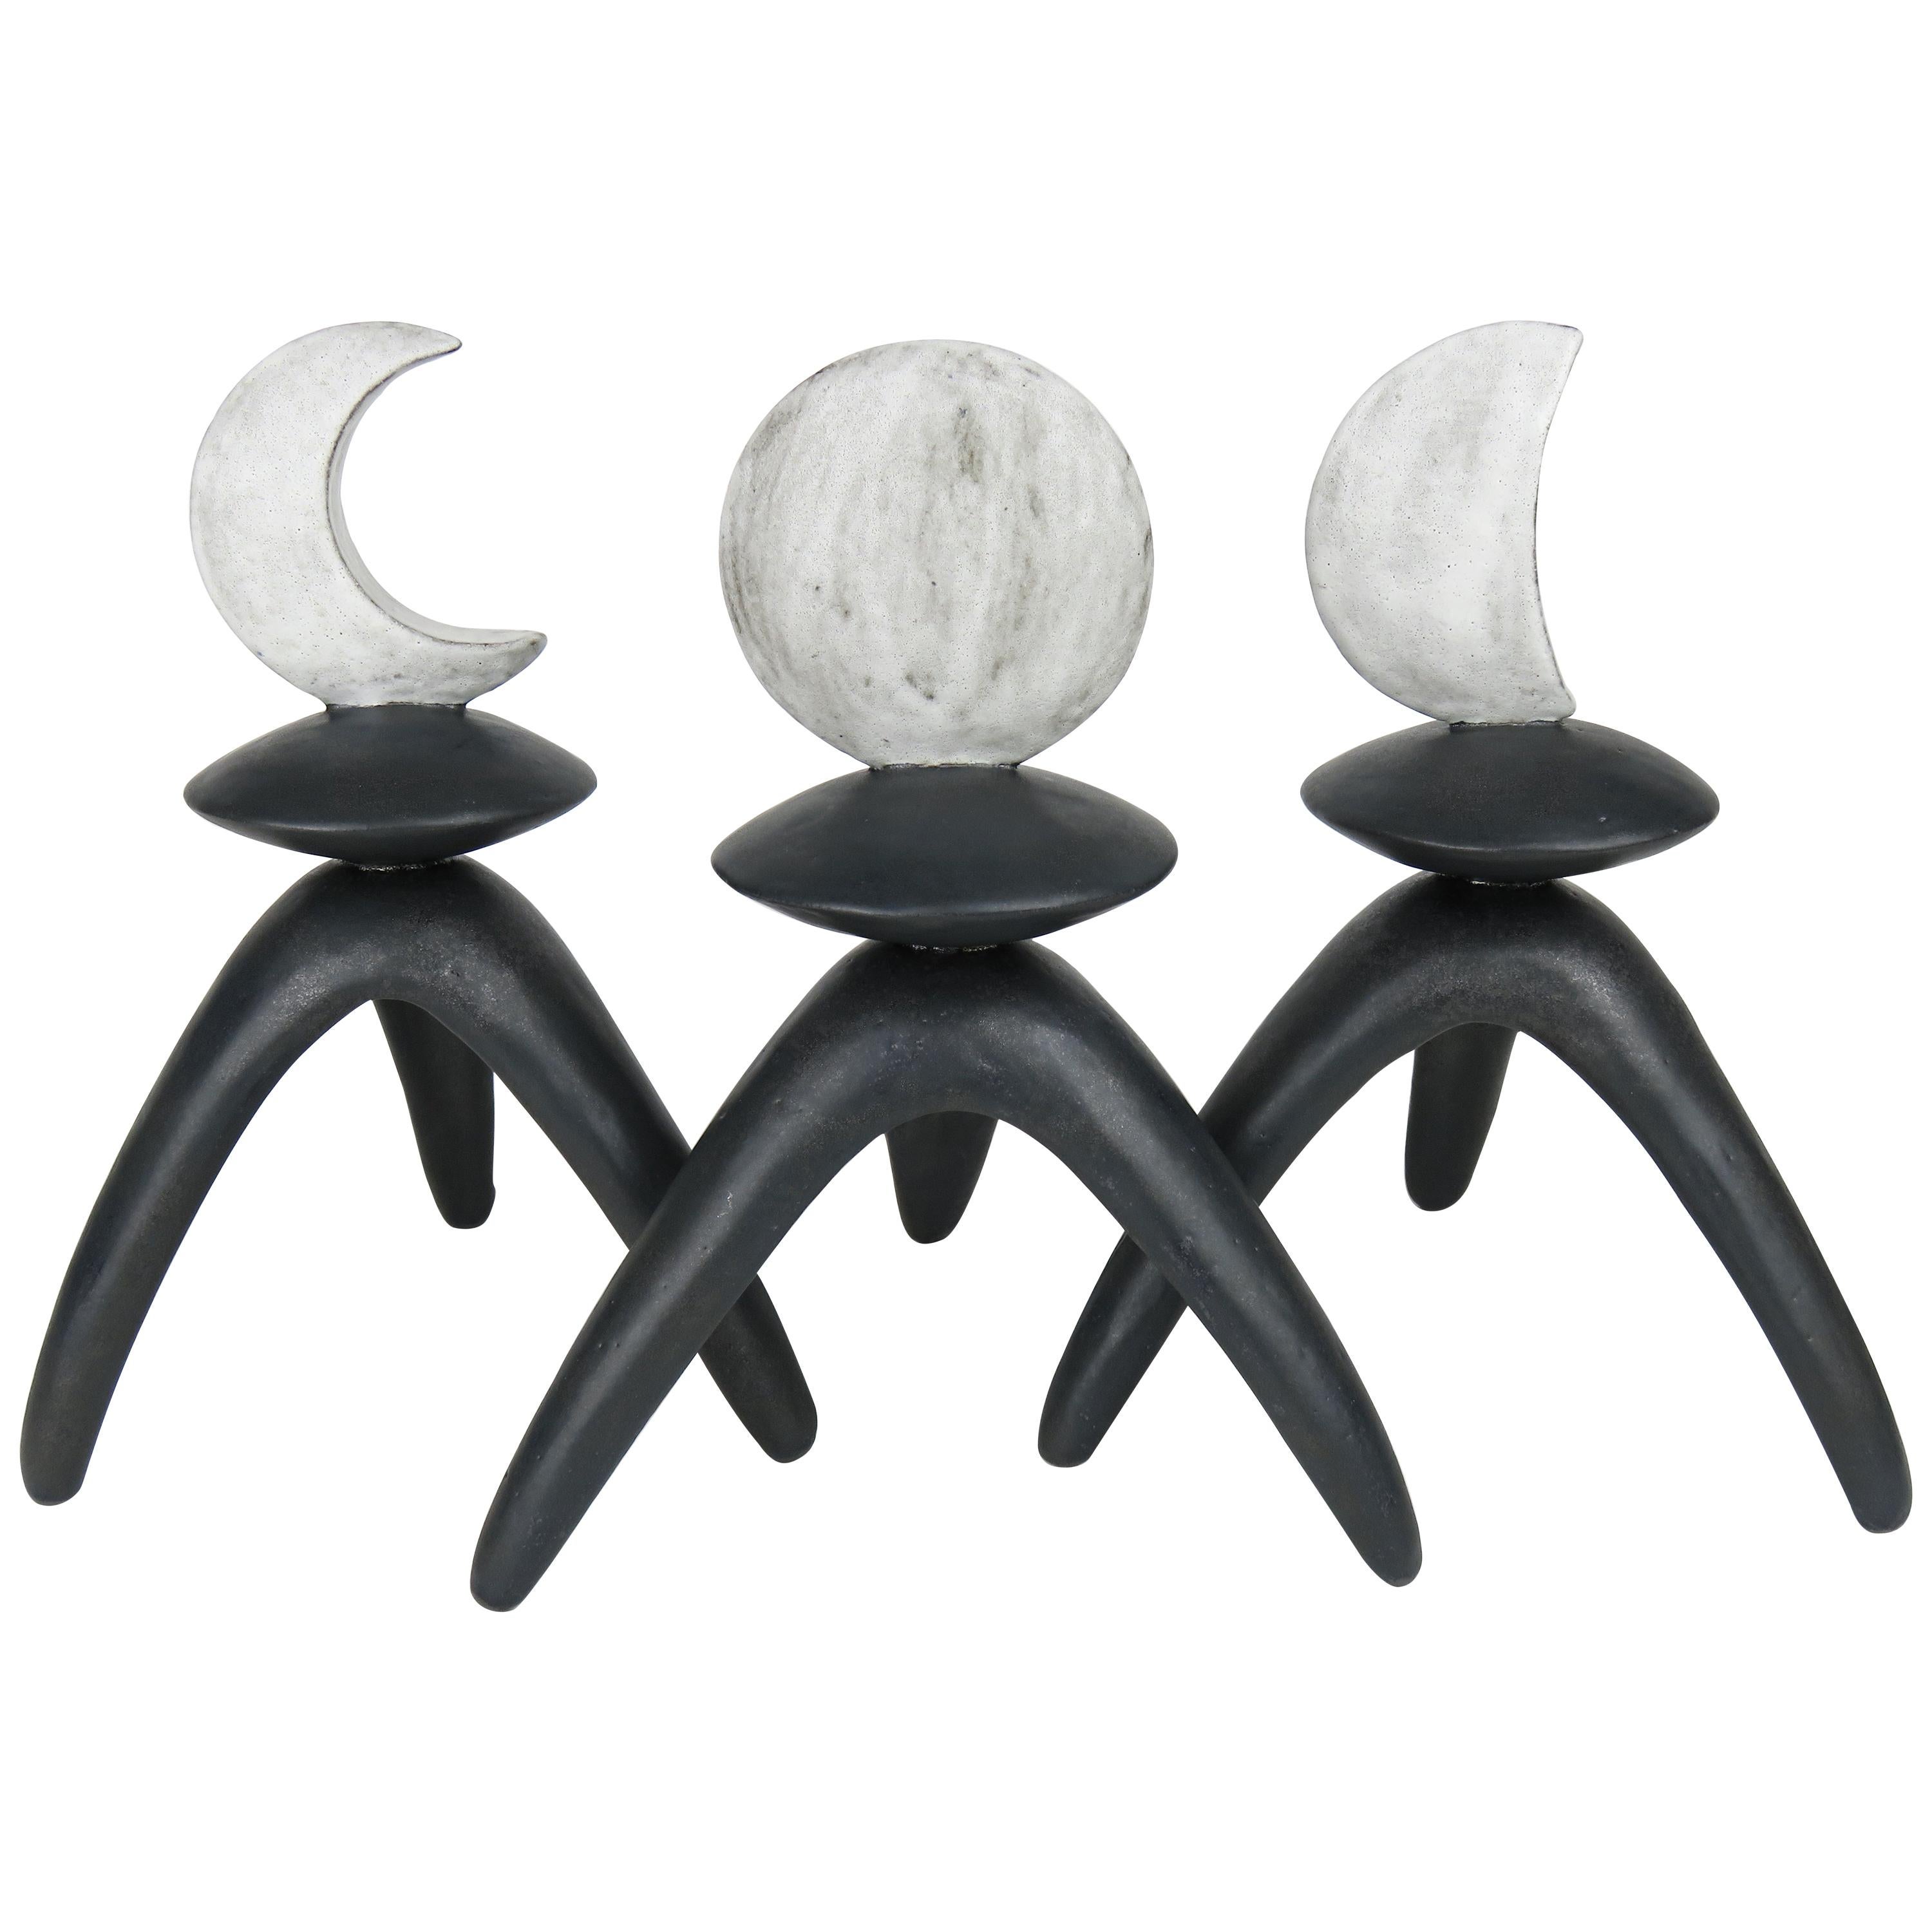 Moon Phase Totems, White on Black Legs, Hand Built Ceramic by Helena Starcevic